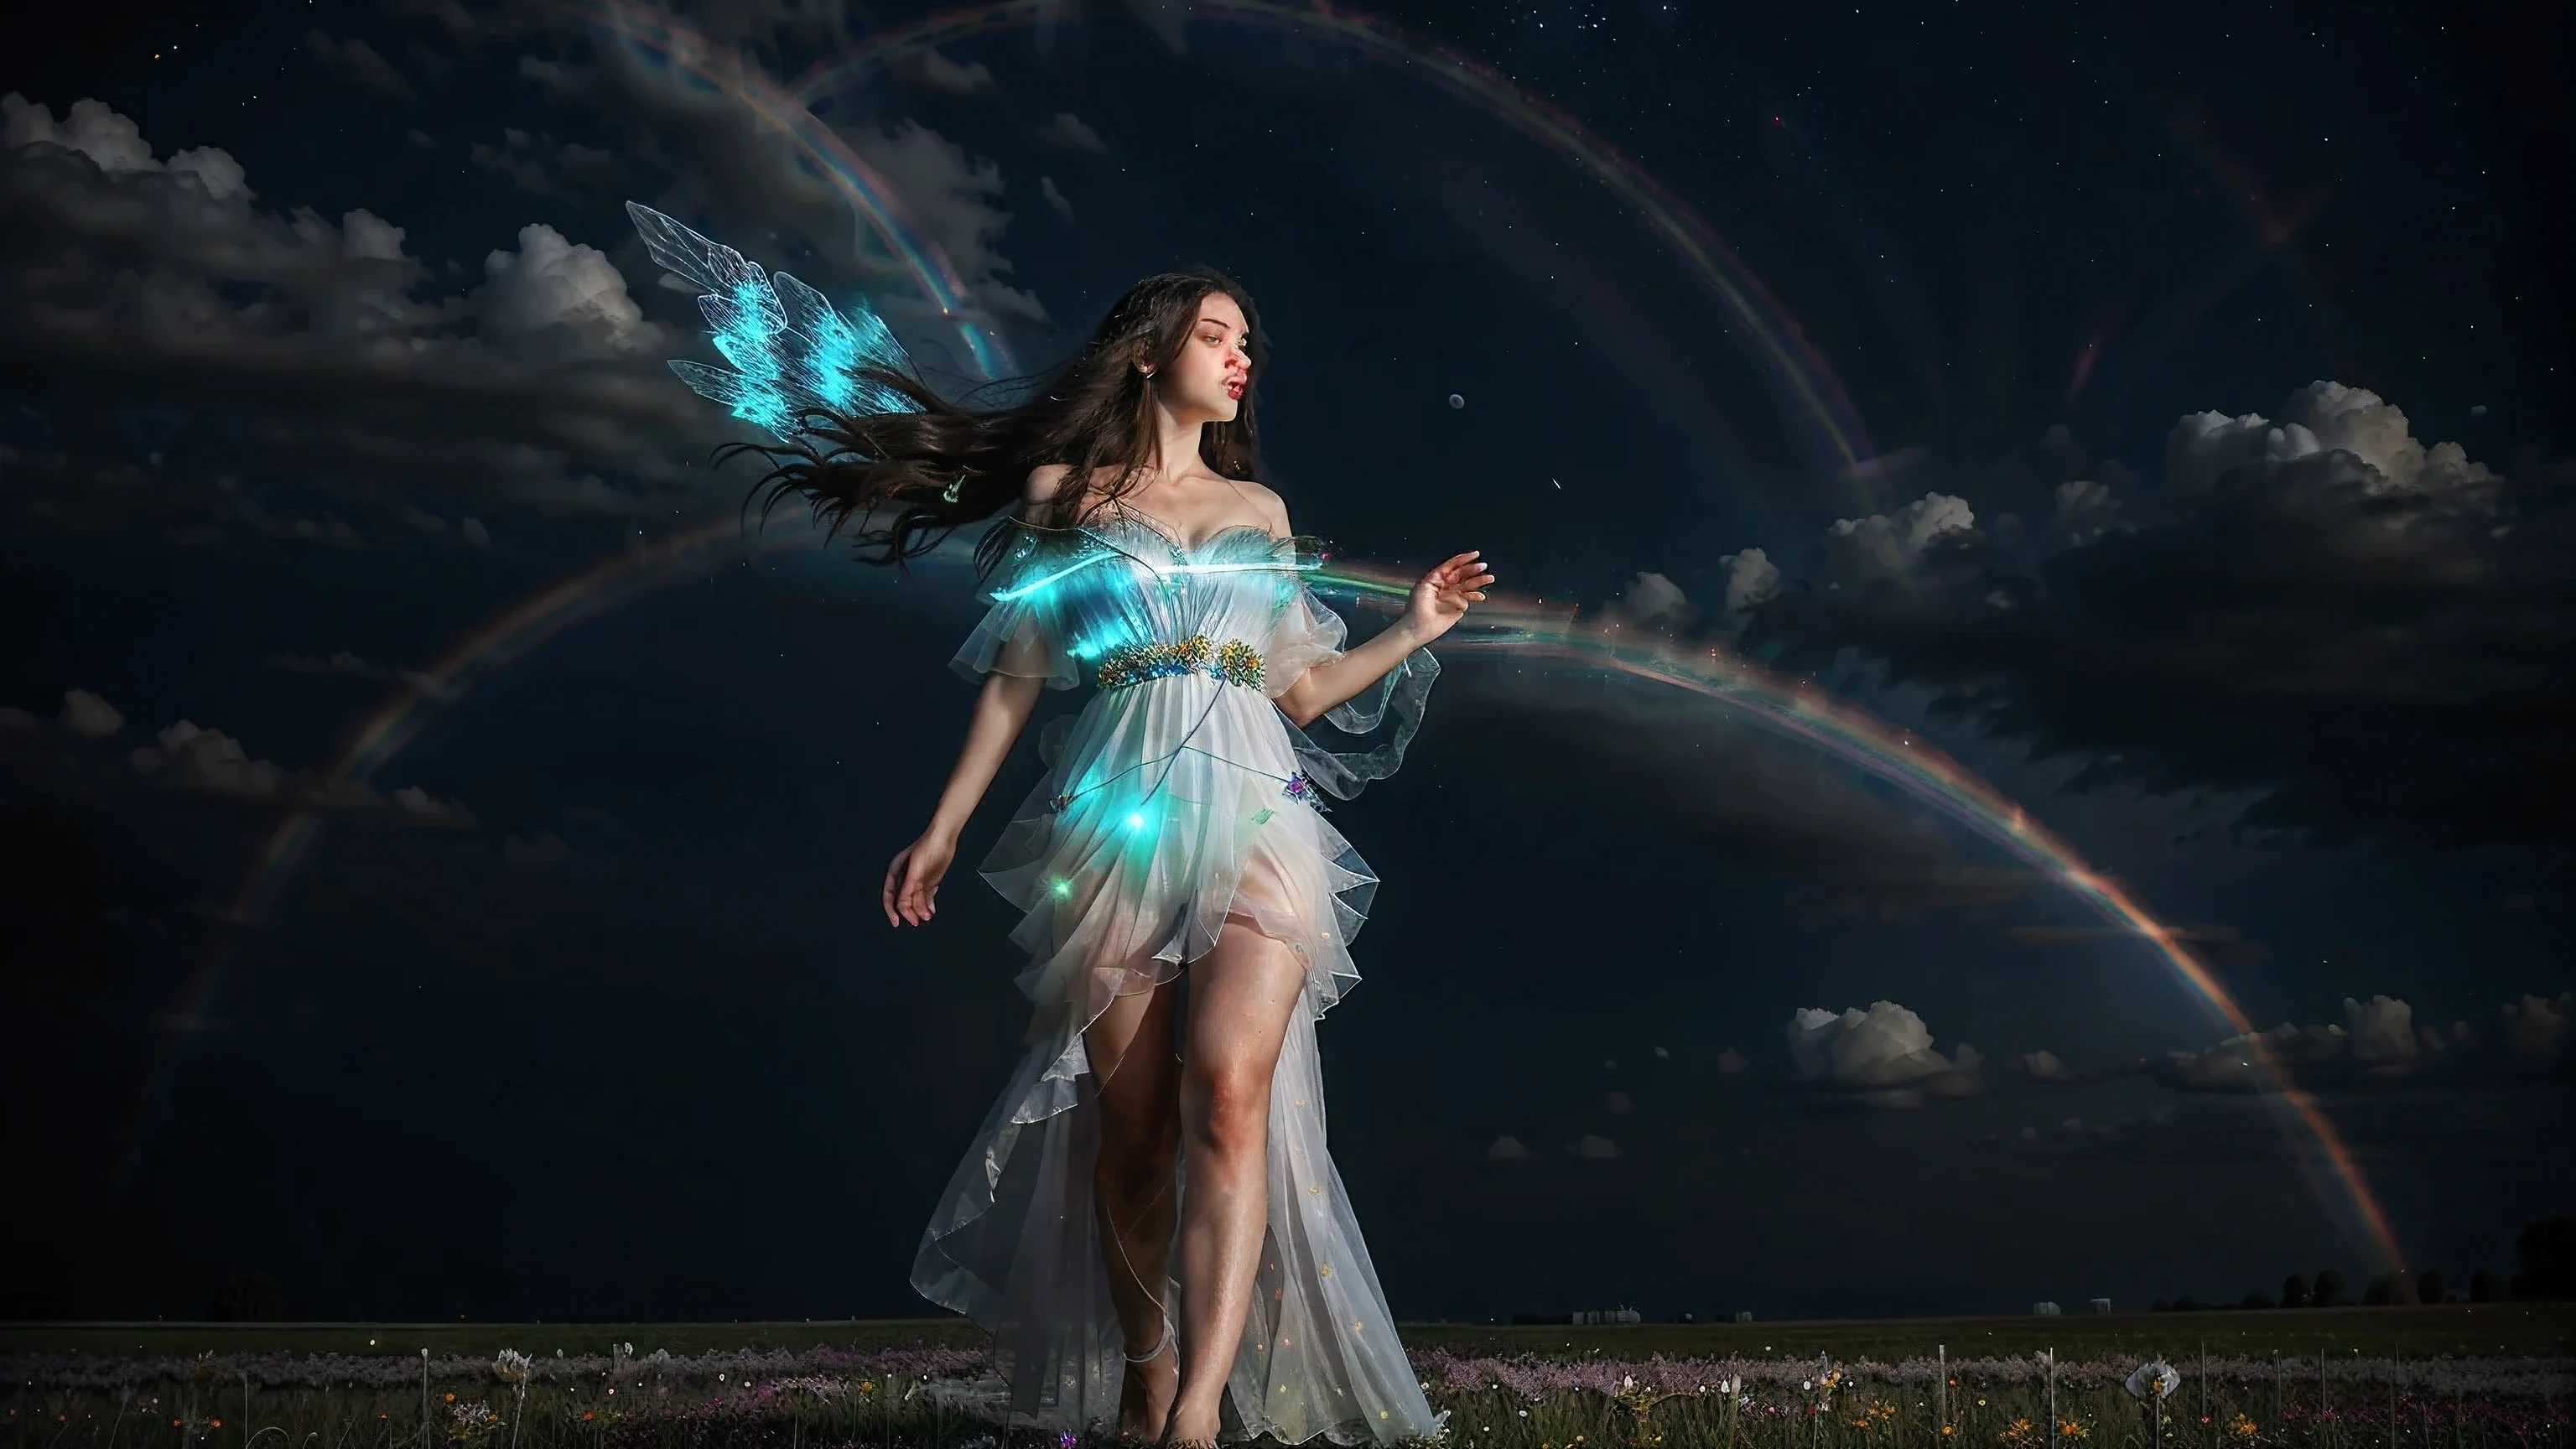 A beautiful and magical elemental girl with long flowing hair., Ethereal spiritual clothing, Walking through a field of crystal flowers amidst the dark rainbow moonlight, the flowers glowed brightly.

